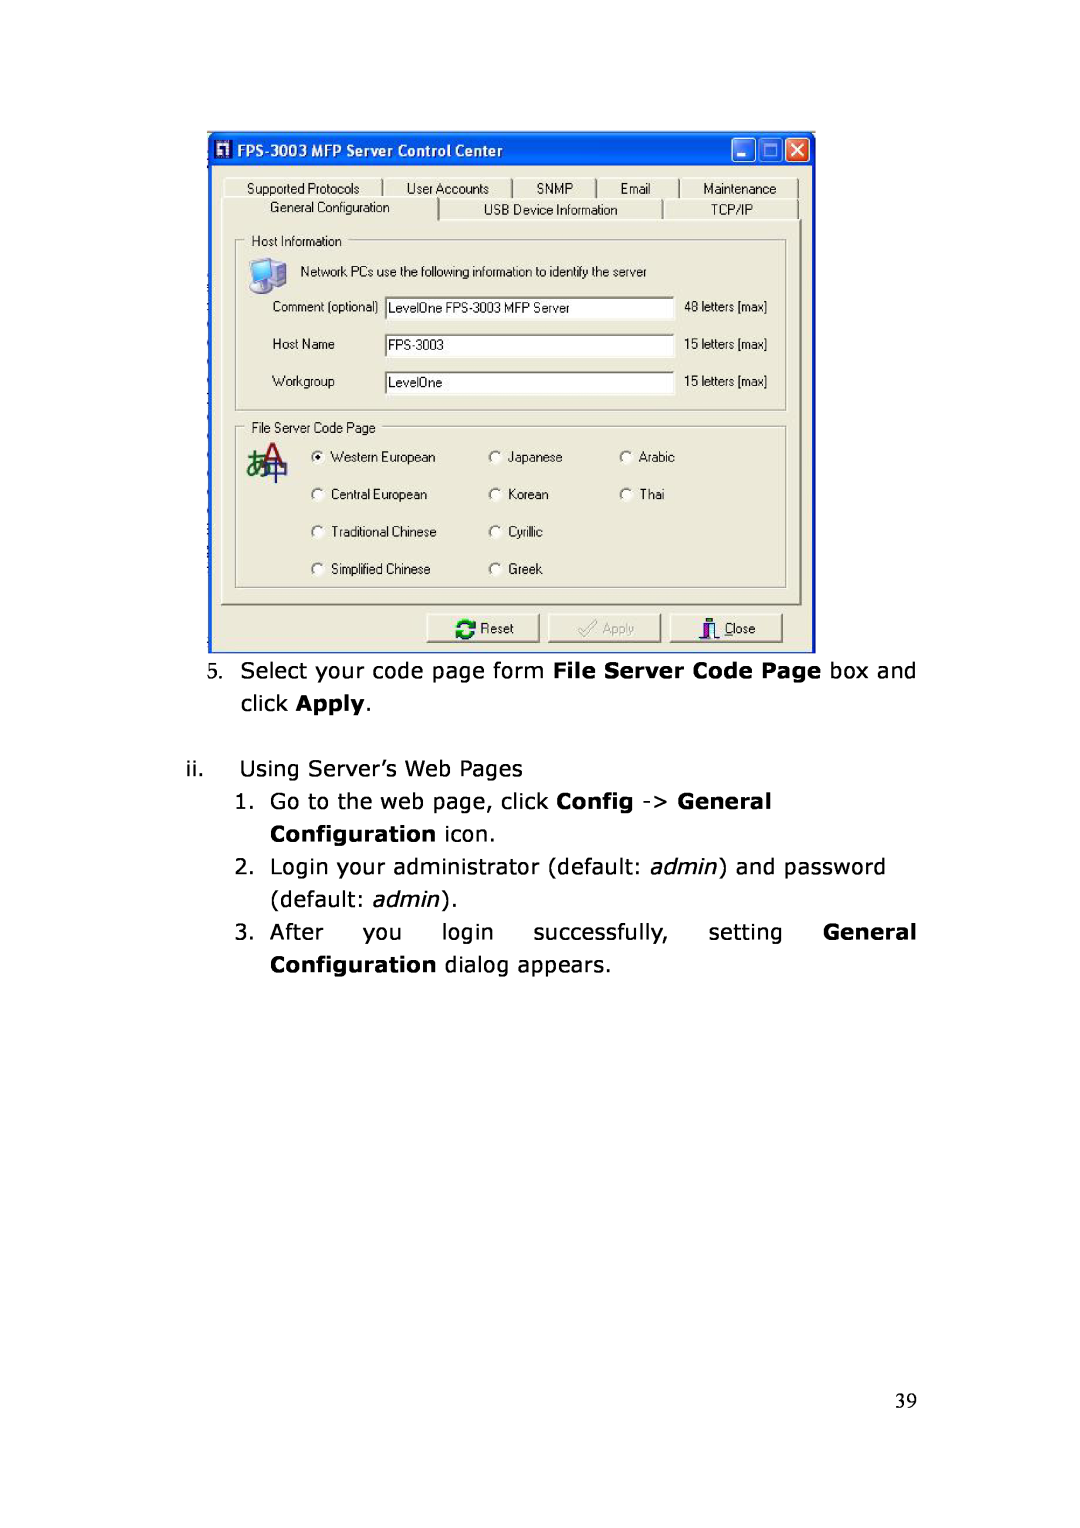 LevelOne FPS-3003 user manual ii. Using Server’s Web Pages, Go to the web page, click Config - General Configuration icon 